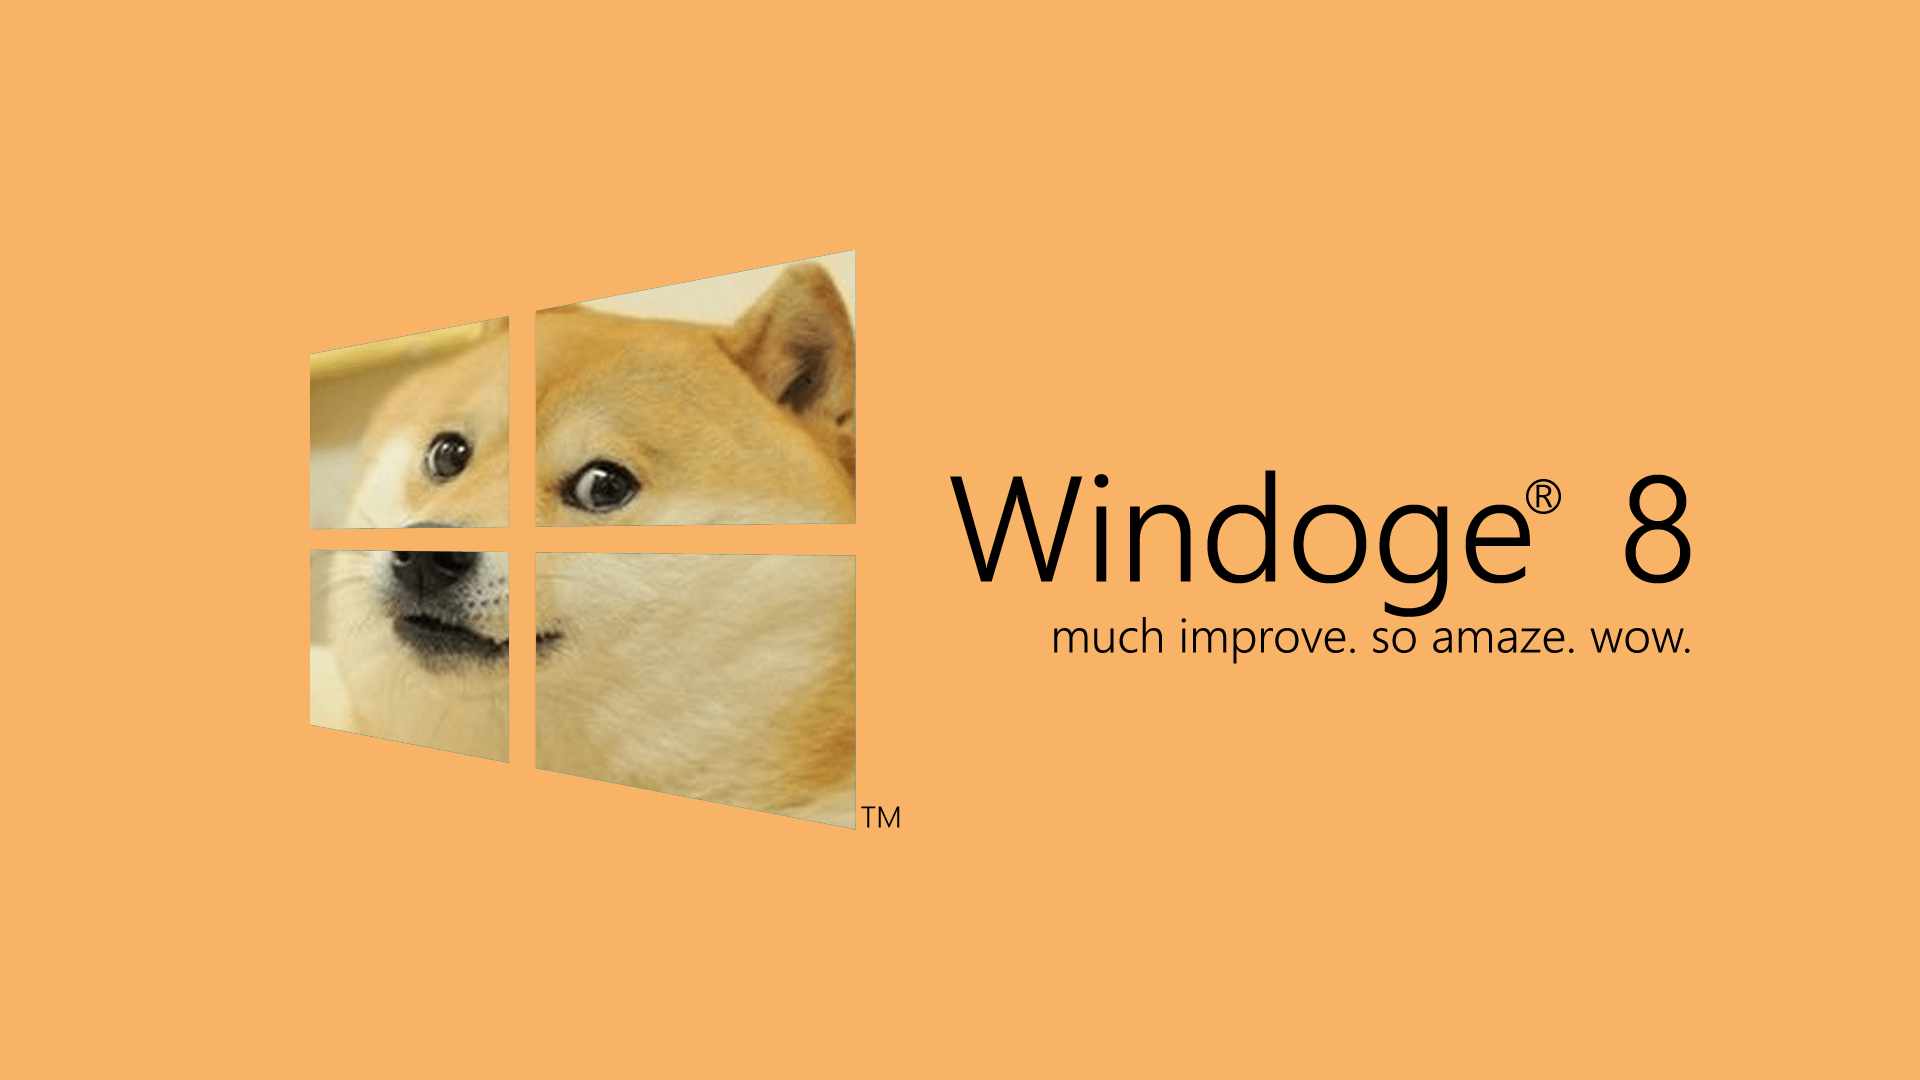 Doge Wallpapers Wallpaper Cave